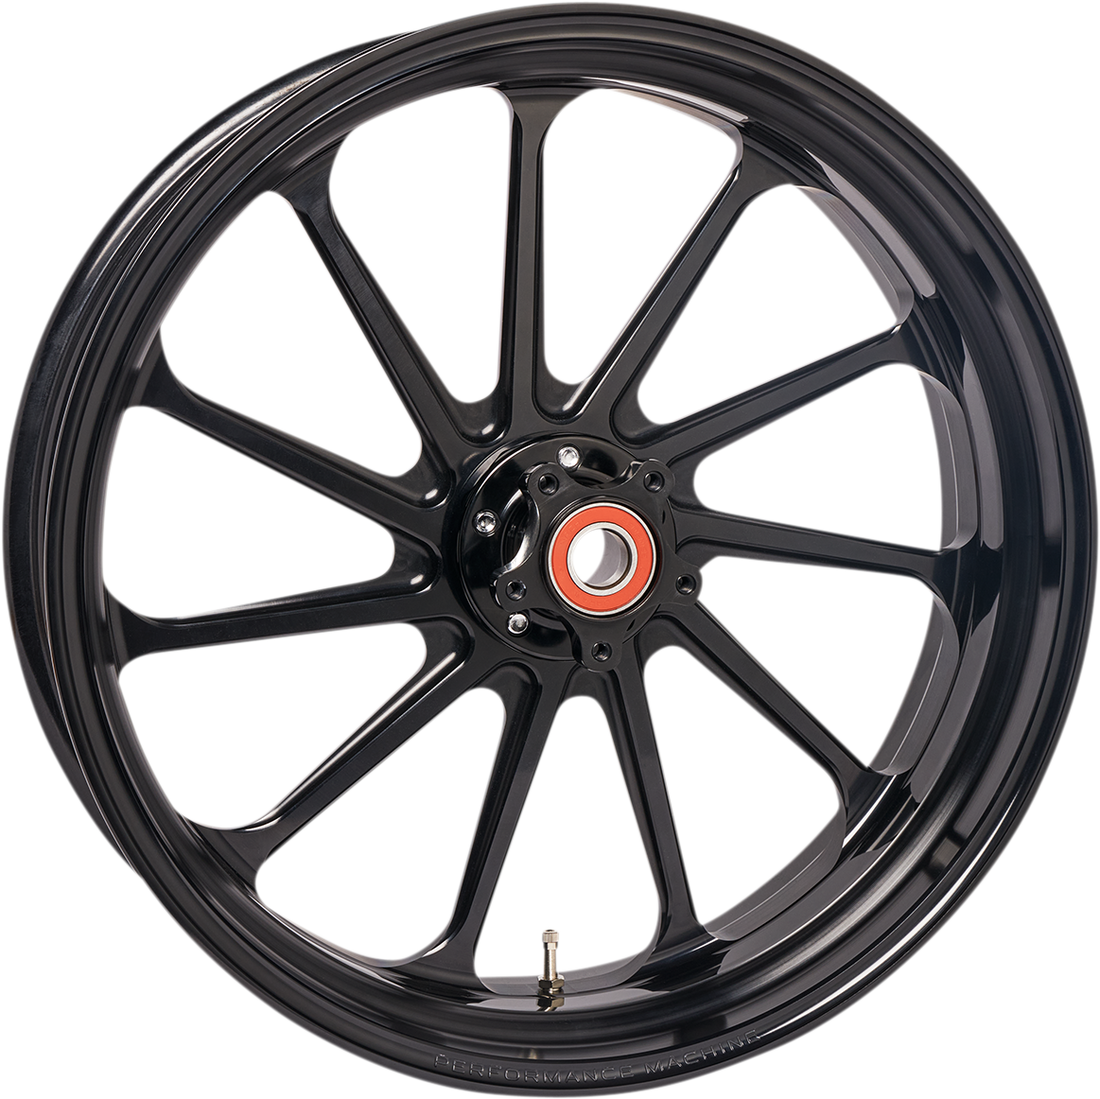 0201-2376 - PERFORMANCE MACHINE (PM) Wheel - Assault - Dual Disc - Front - Black Ops* - 18"x5.50" - With ABS 12047814RASLAPB